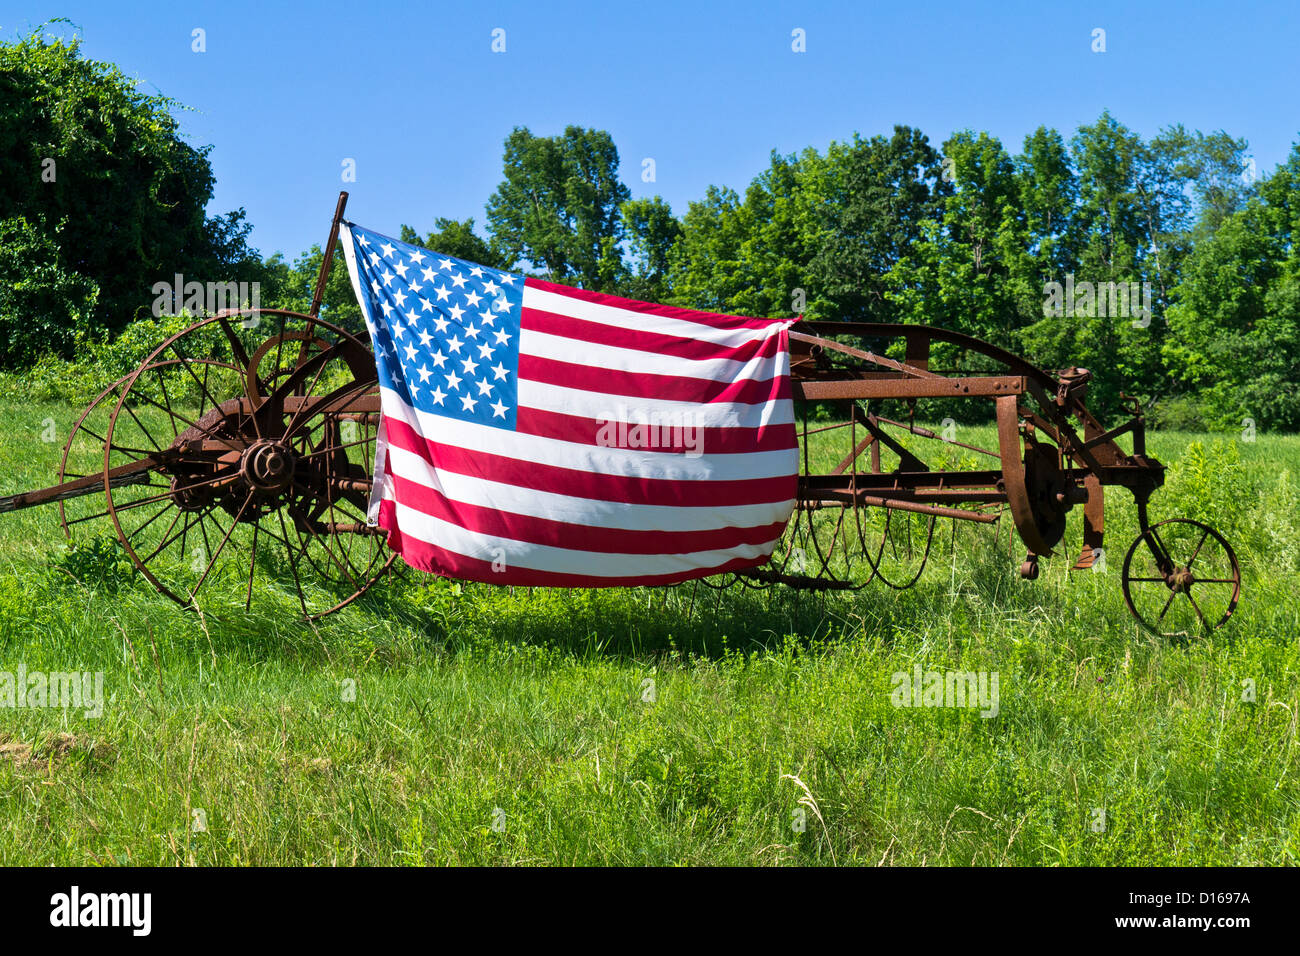 American flag attached to farm machinery Stock Photo